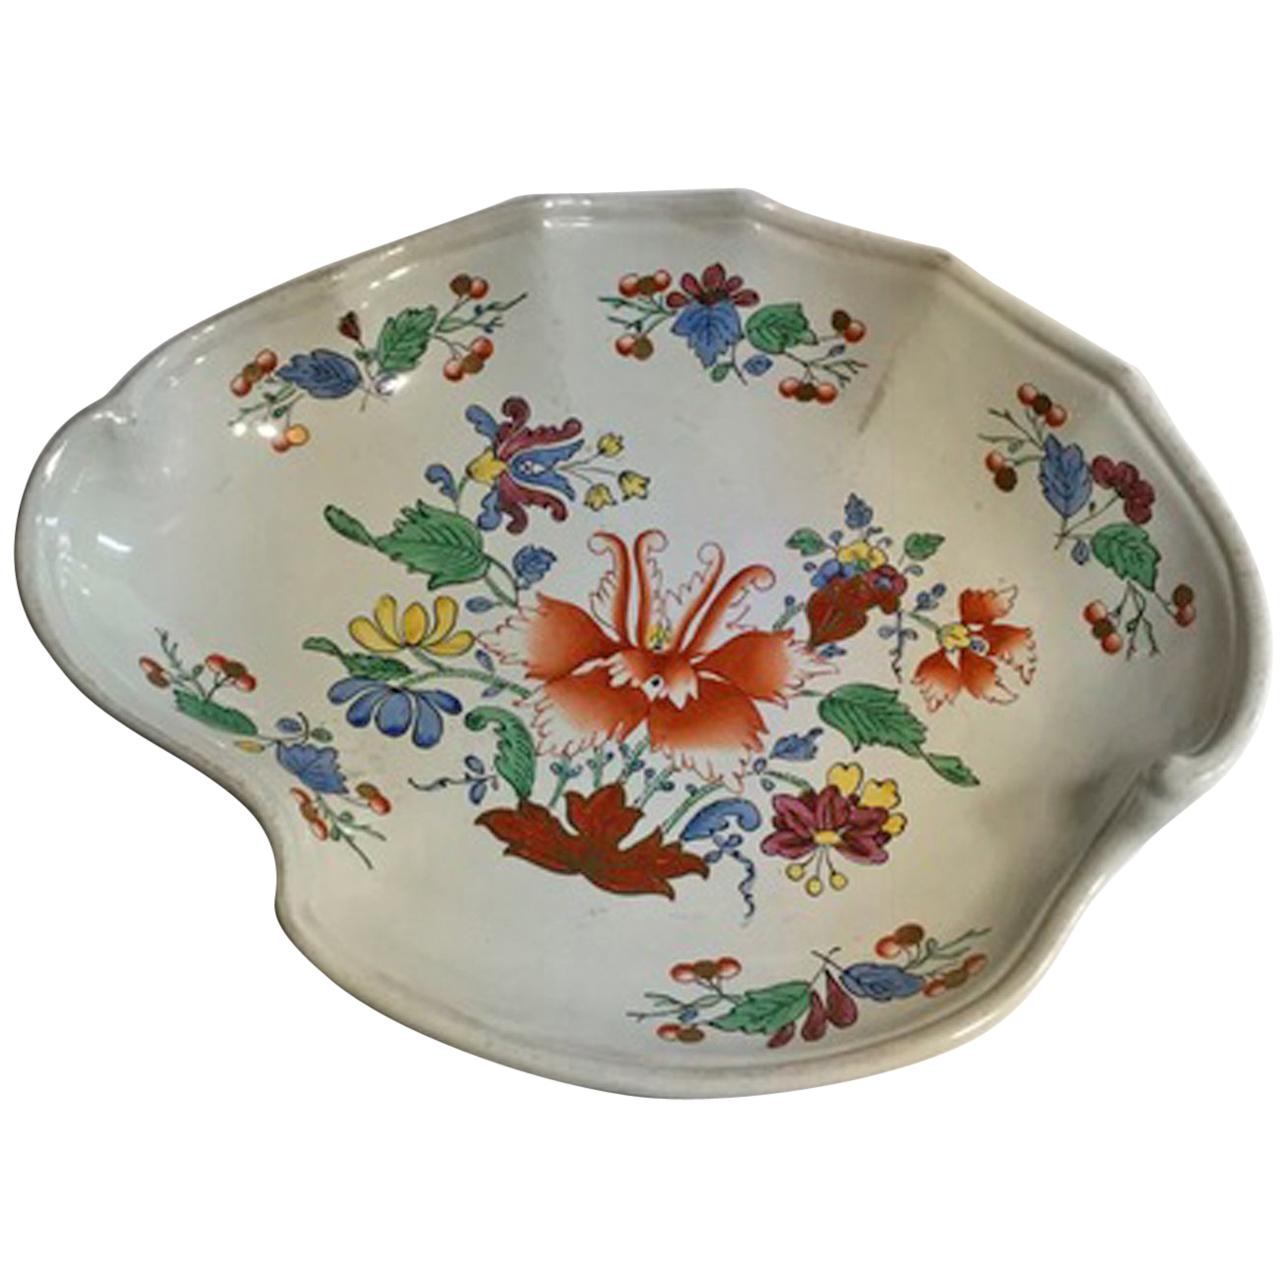 Italy Richard Ginori Mid-18th Century Porcelain Hand Painted Tulip Decor Bowl For Sale